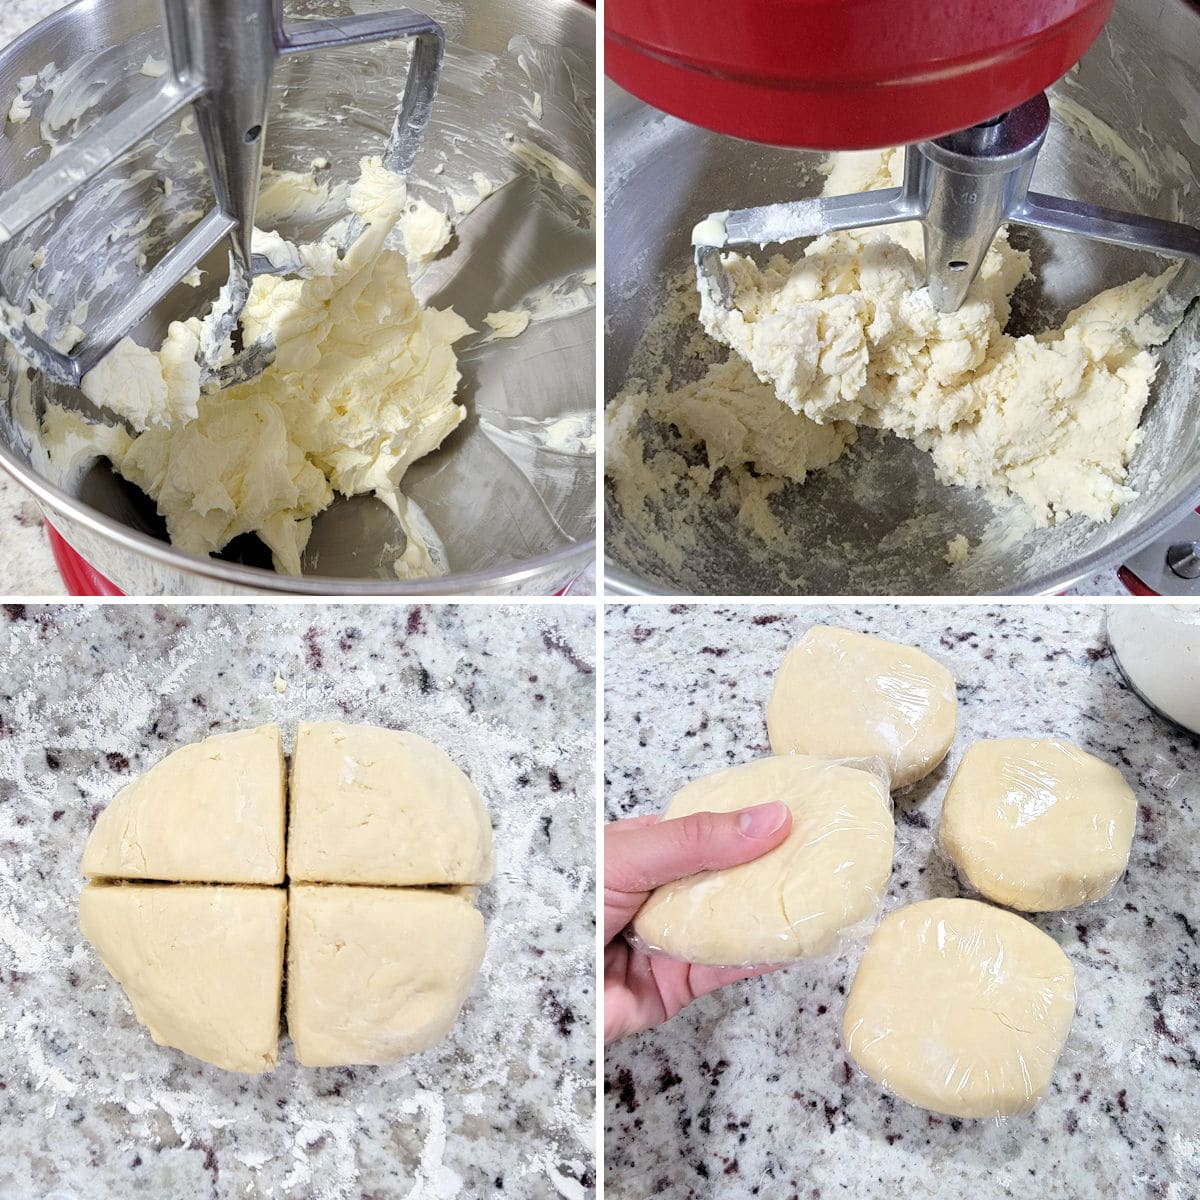 Mixing dough in a stand mixer and dividing into discs.